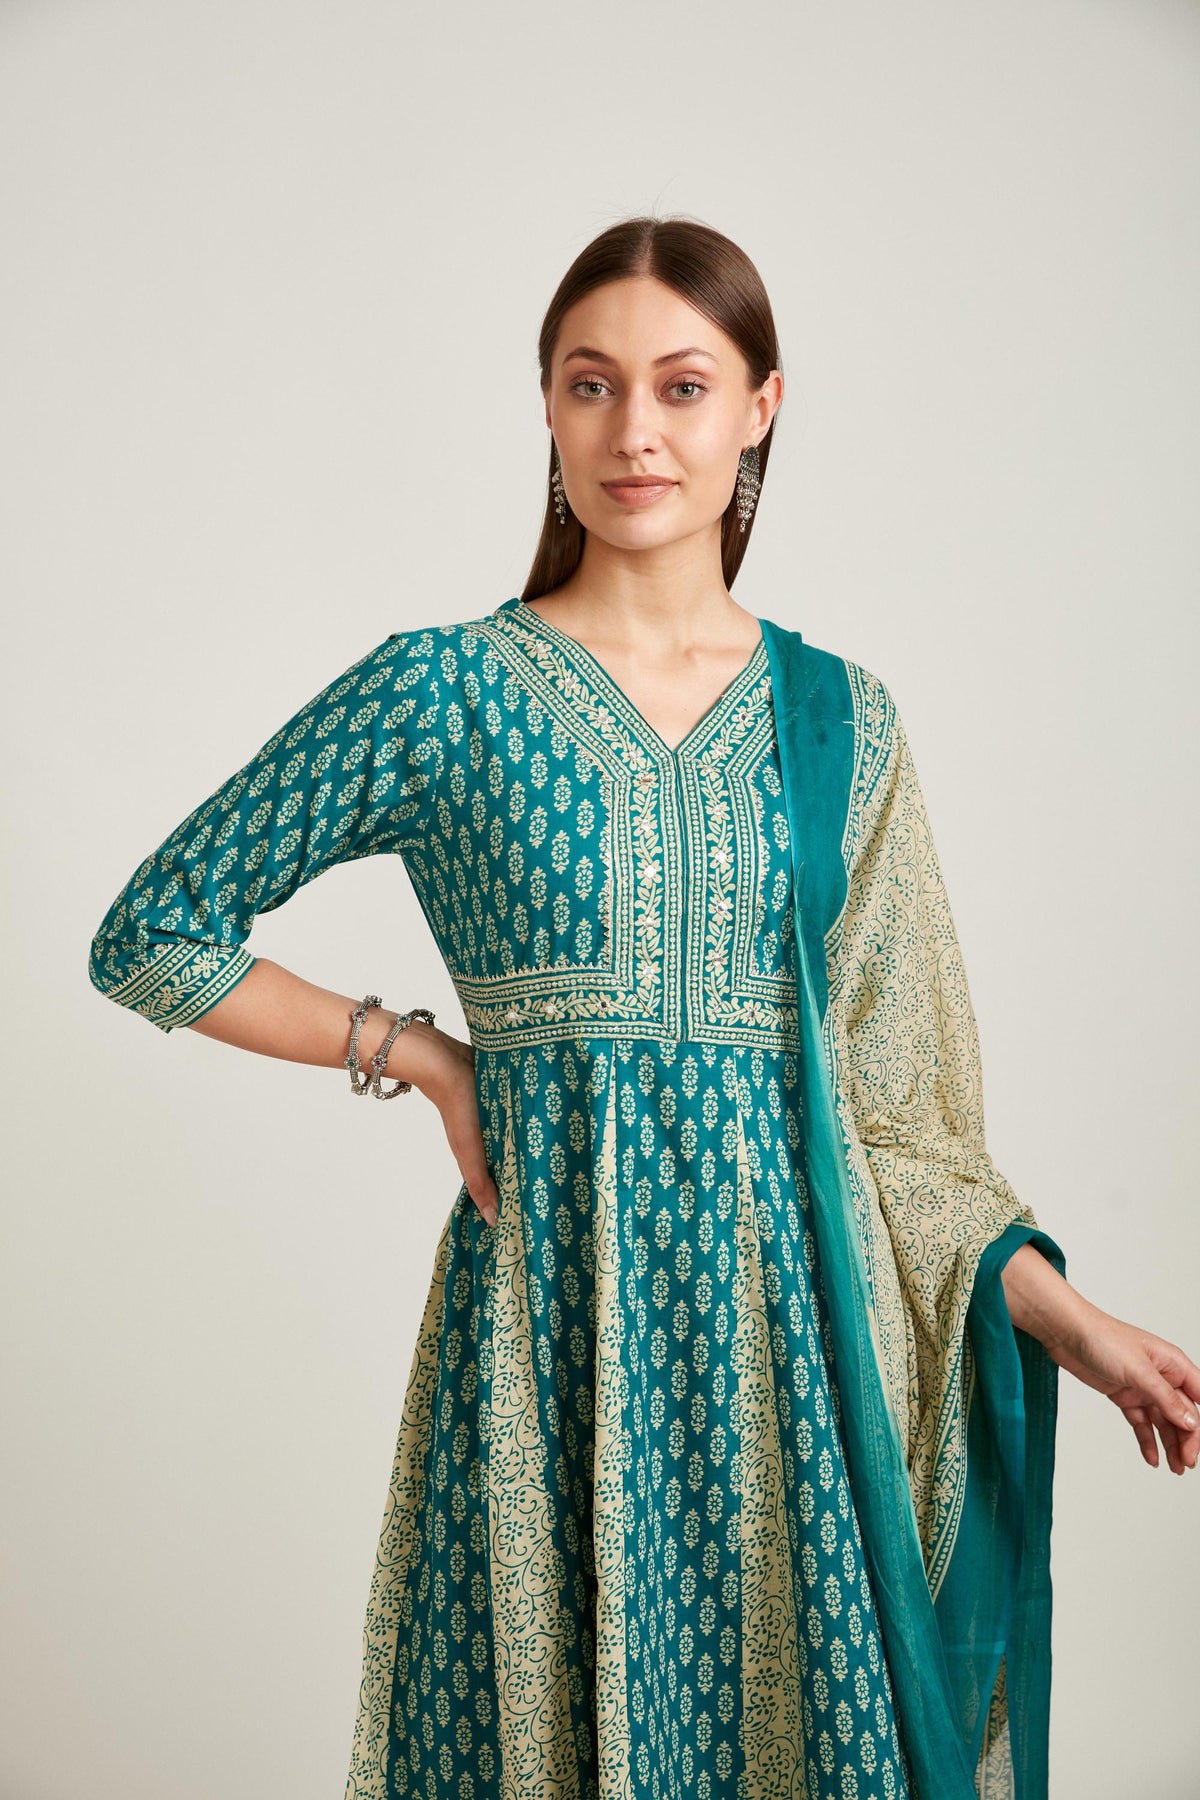 Neerus India - Code - NKTS-1027 Have you checked out this scintillating  pink color kalidhar Kurti with stylish neckline. Check the link to find  more details http://www.neerus.com/Products/Neerus-kurtis/Neerus/NKTS-1027-Teal-blue-color-net-kalidhar  ...